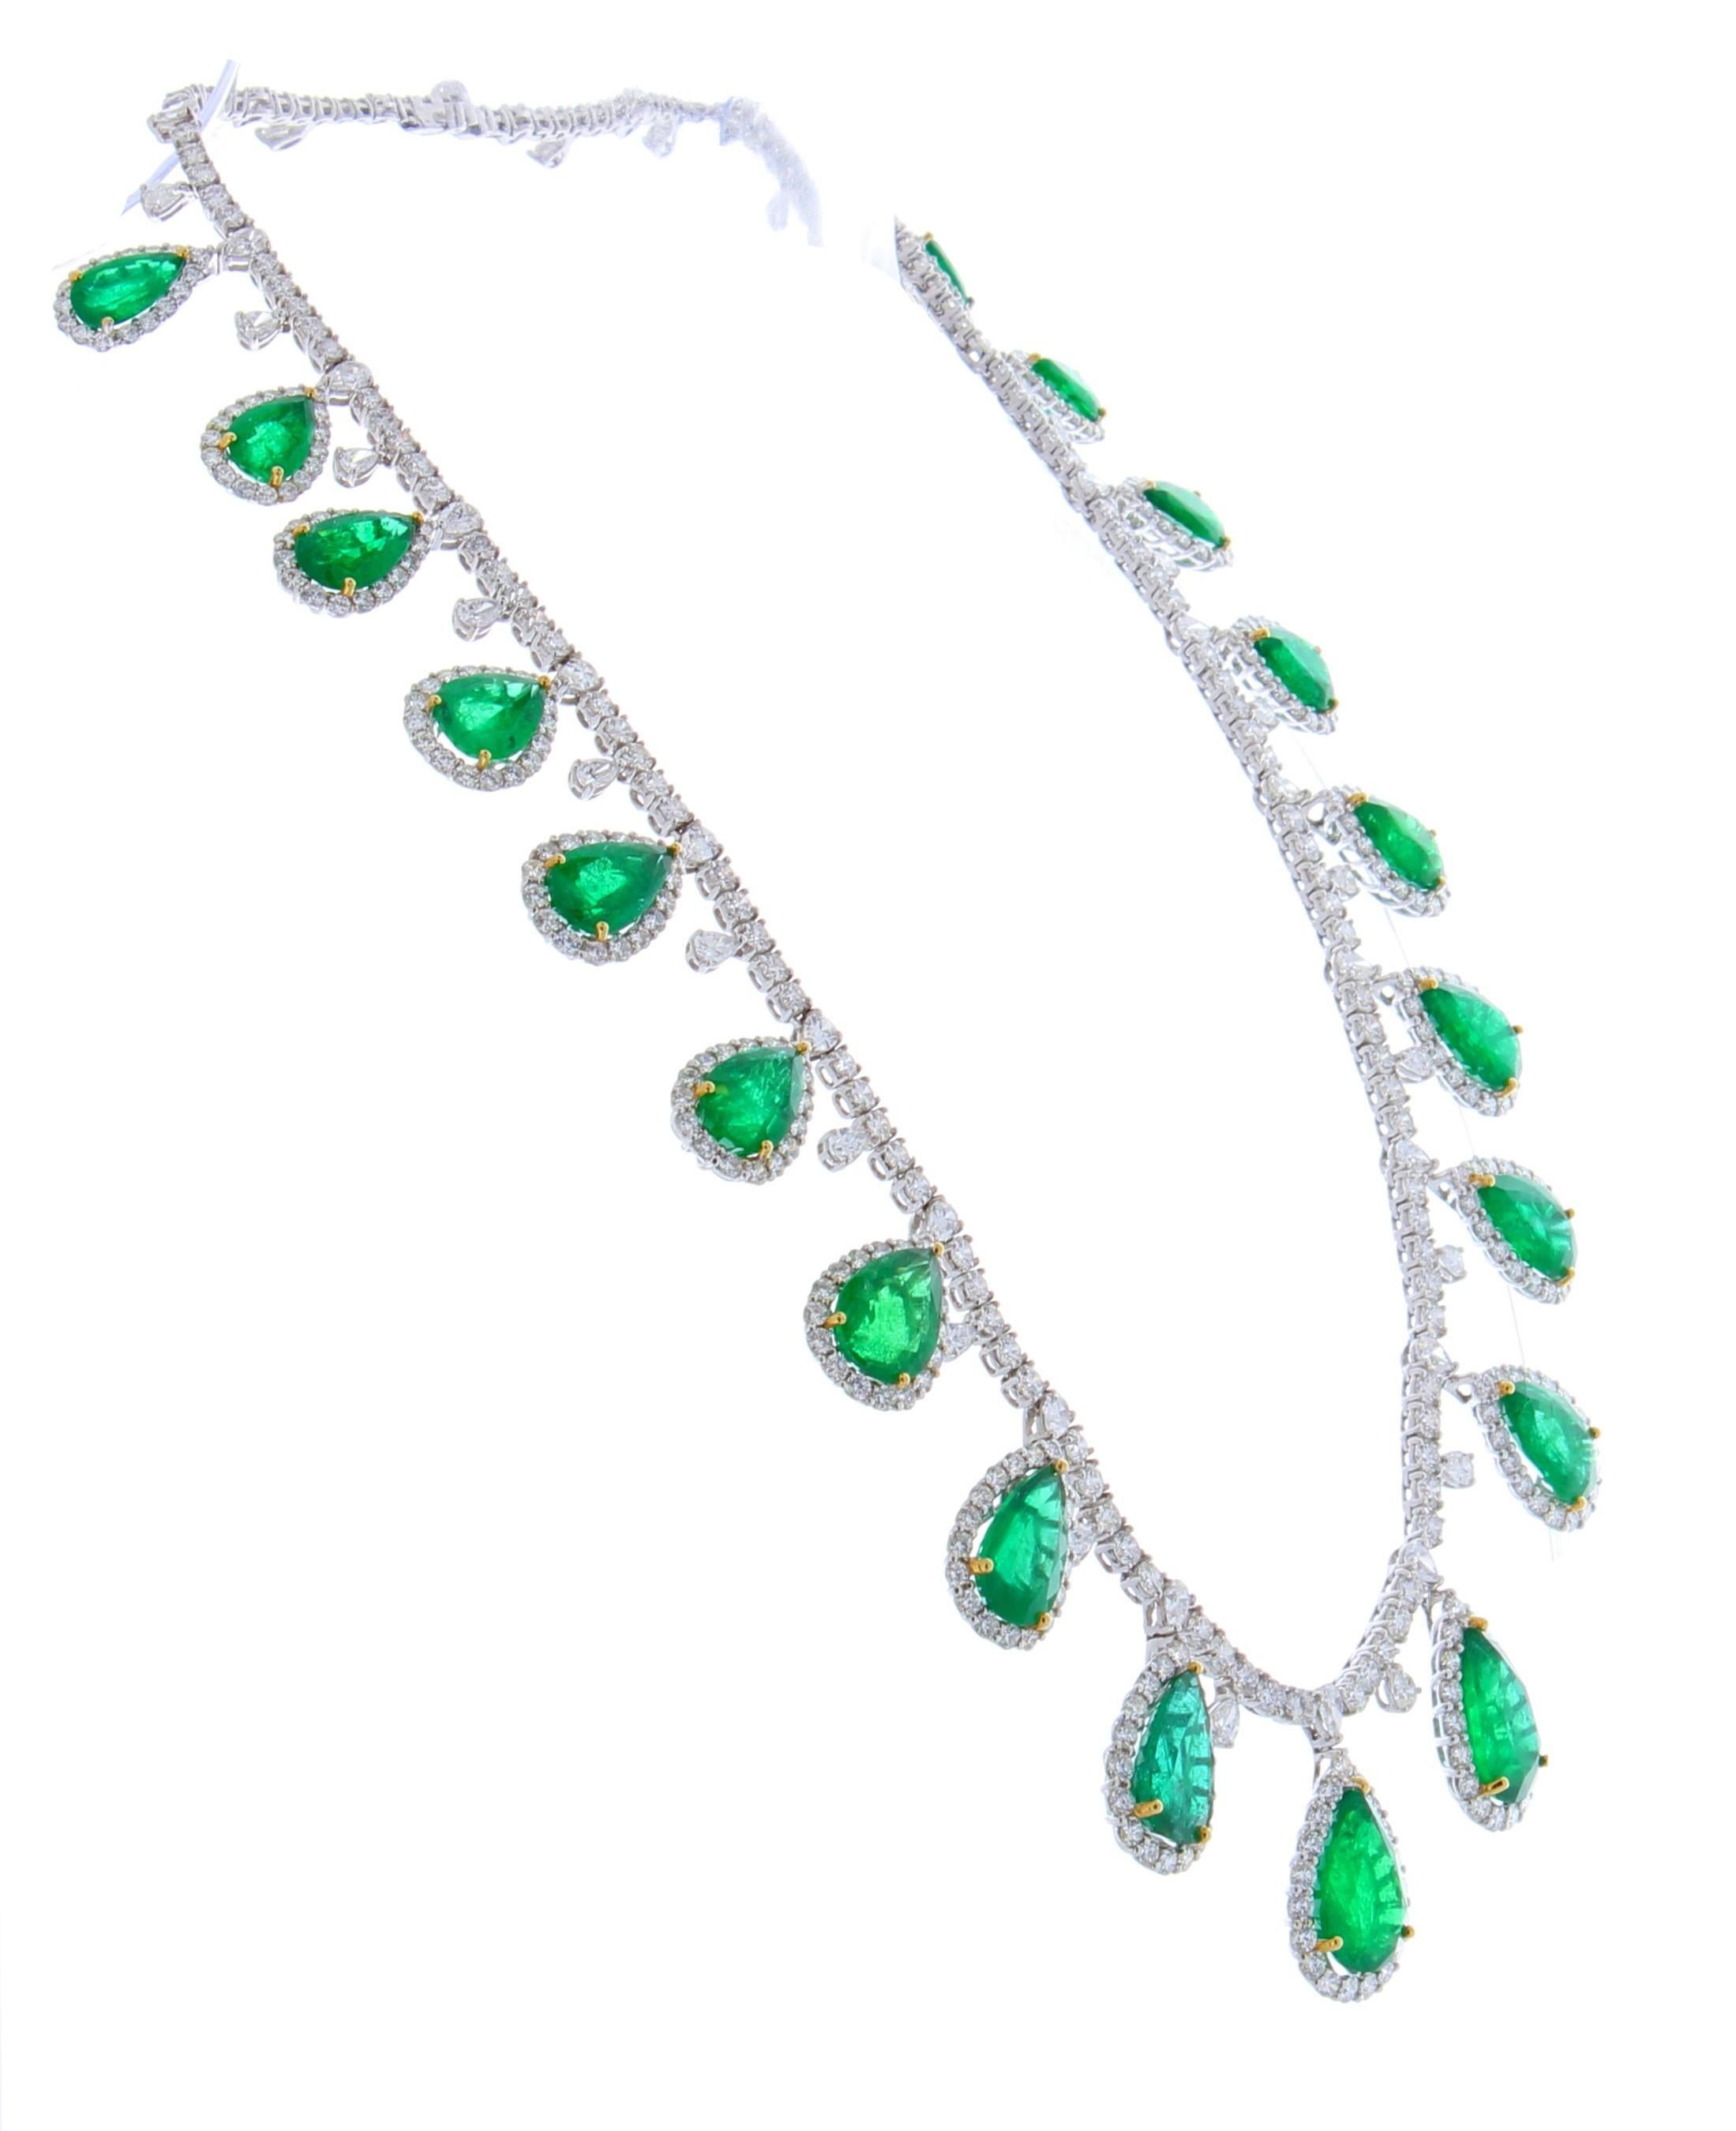 50.34 Carat Total Pear Shaped Emerald and Diamond Necklace in 18 Karat Gold (Tropfenschliff)